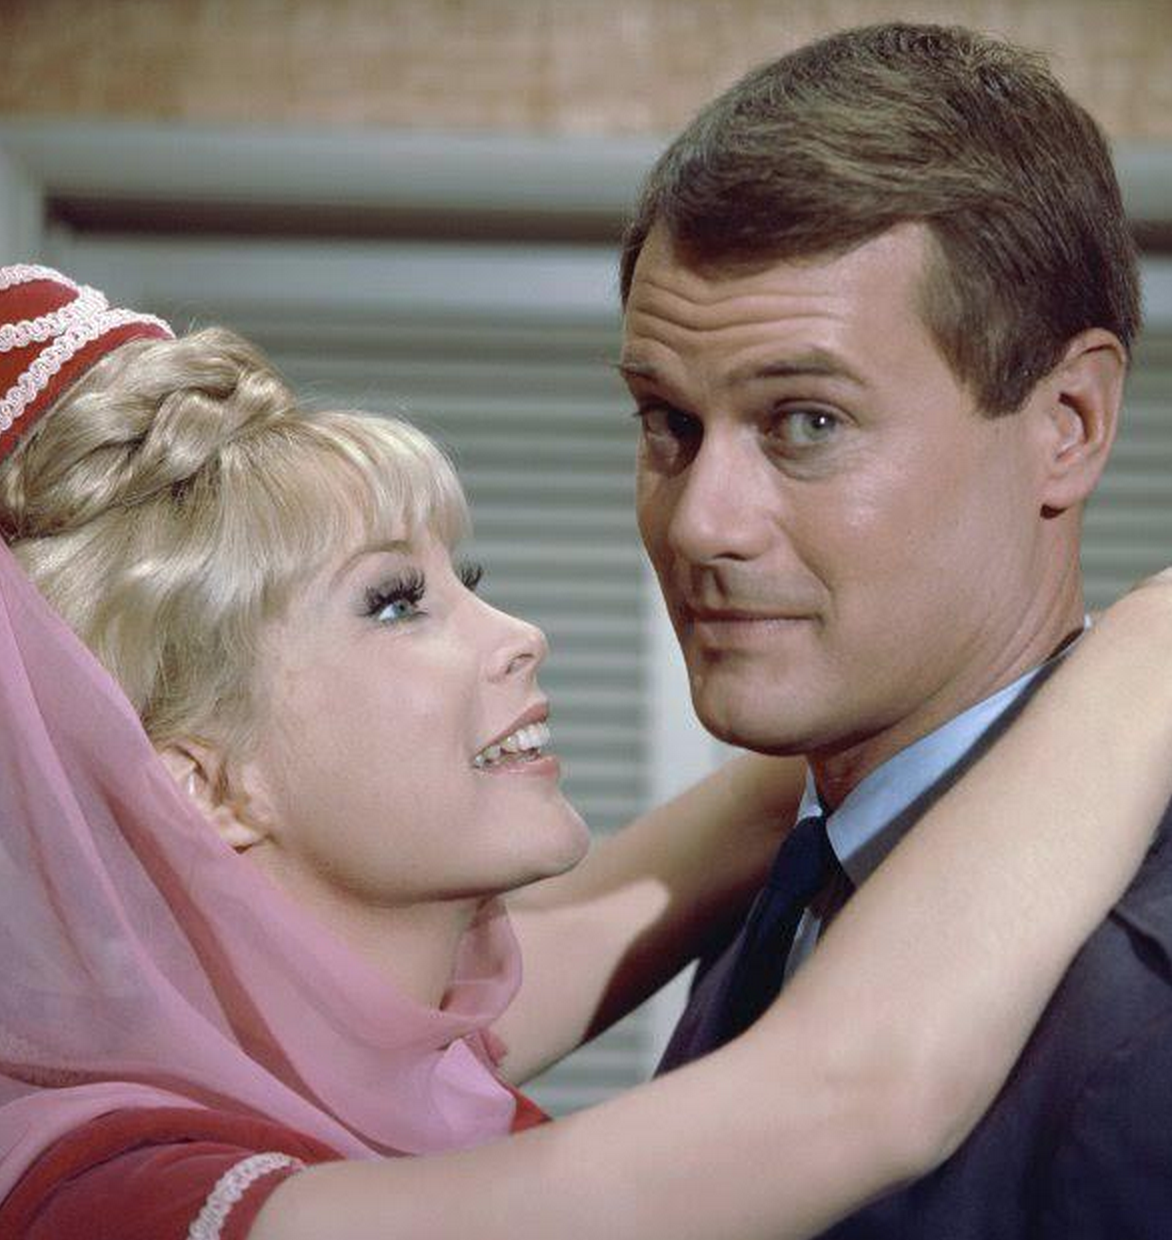 Can You Name These 1960s TV Shows? (Easy Level) I Dream of Jeannie